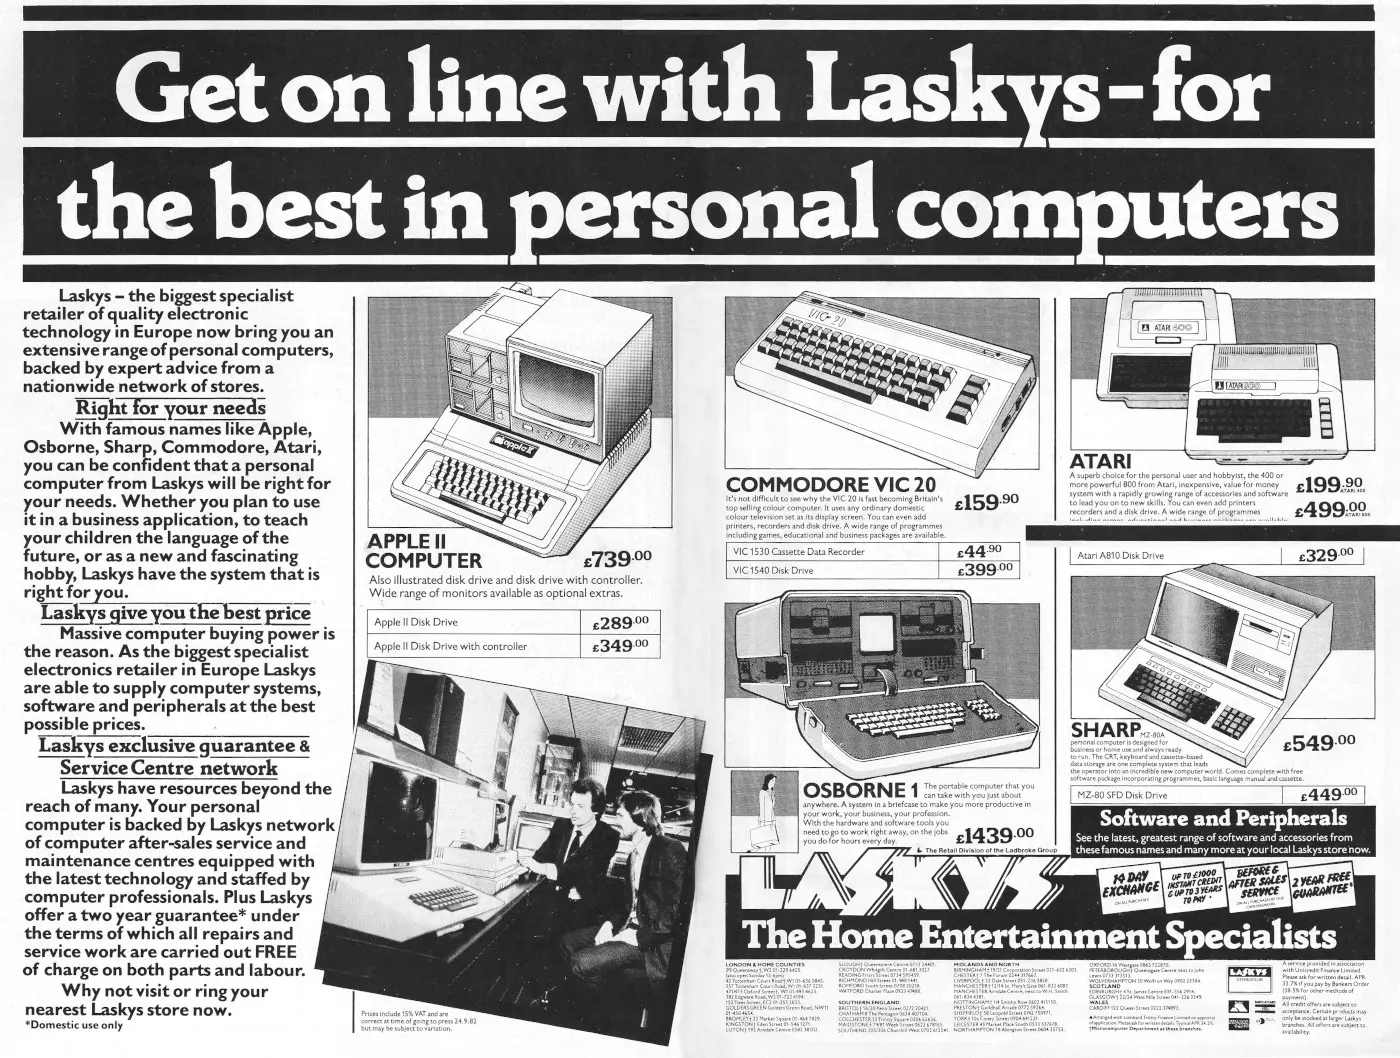 Laskys Advert: <b>Get on line with Laskys - for the best in personal computers</b>, from Personal Computer World, November 1982